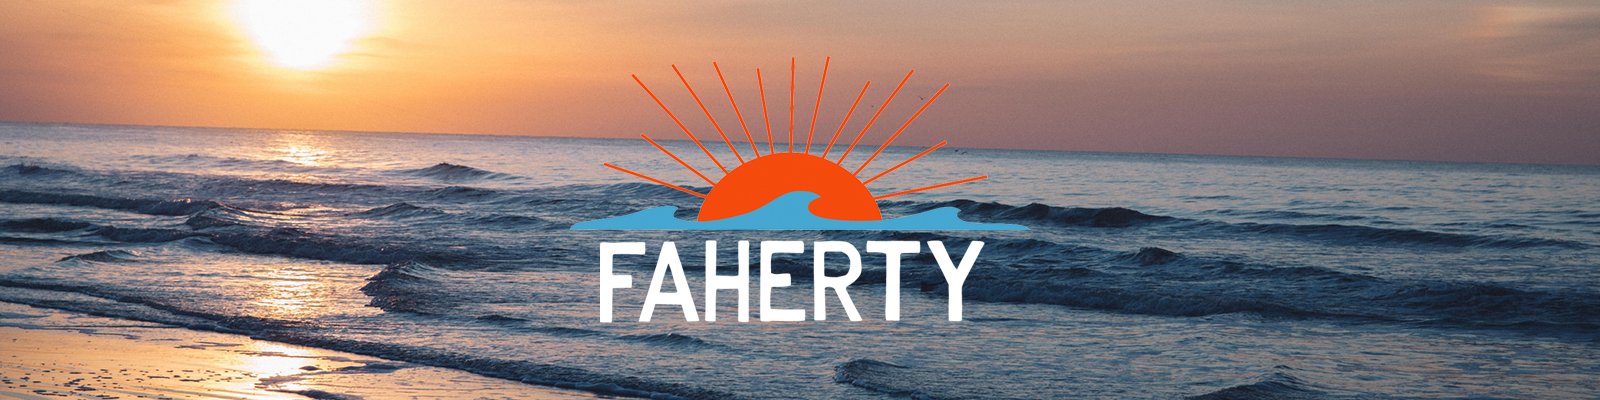 Faherty Sale | STAG